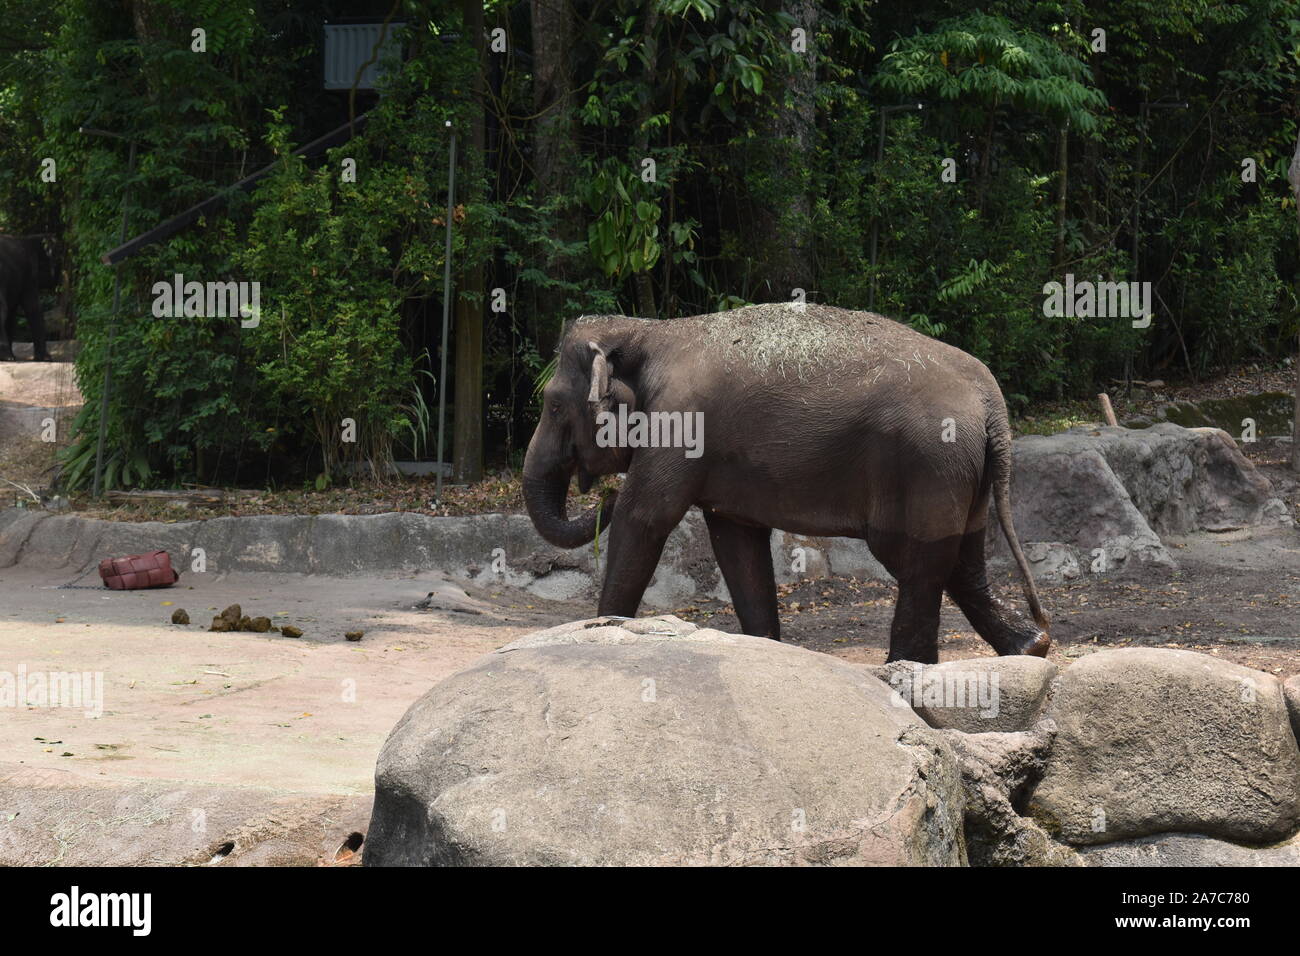 Elephant taking bath in the pond Stock Photo